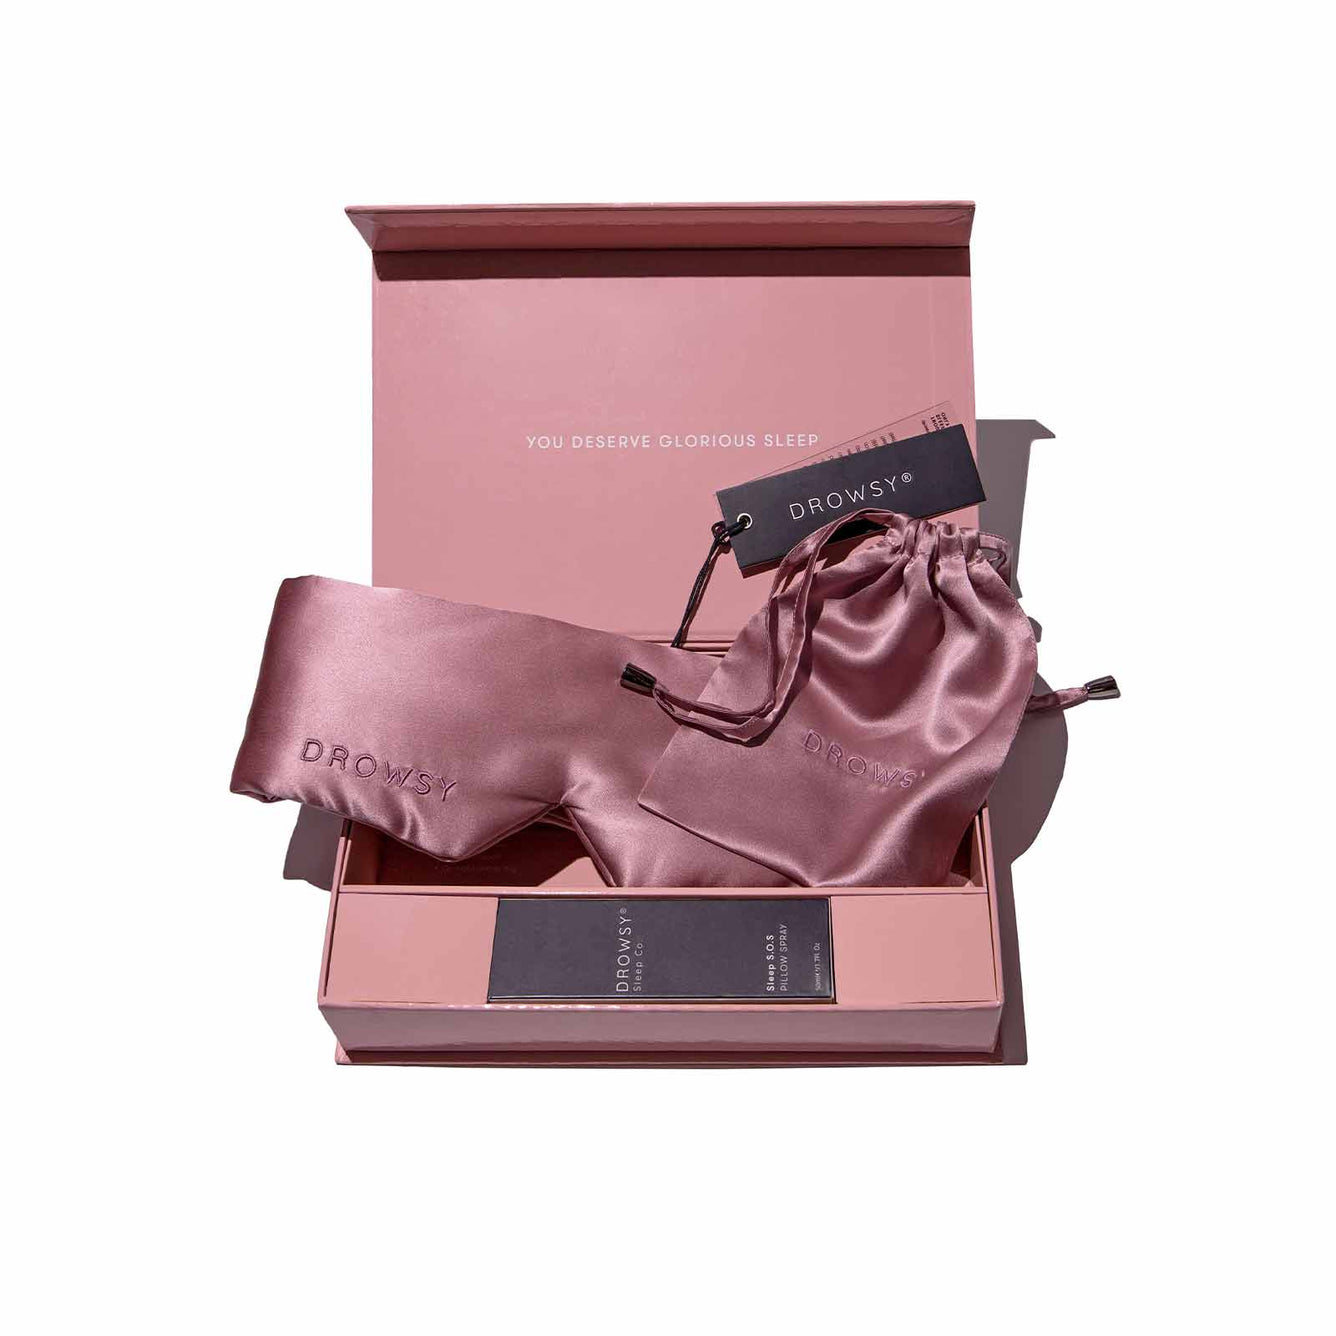 Drowsy Sleep Co. Damask Rose Pink Box Open displaying silk mask and pillow spray inside placed on white background